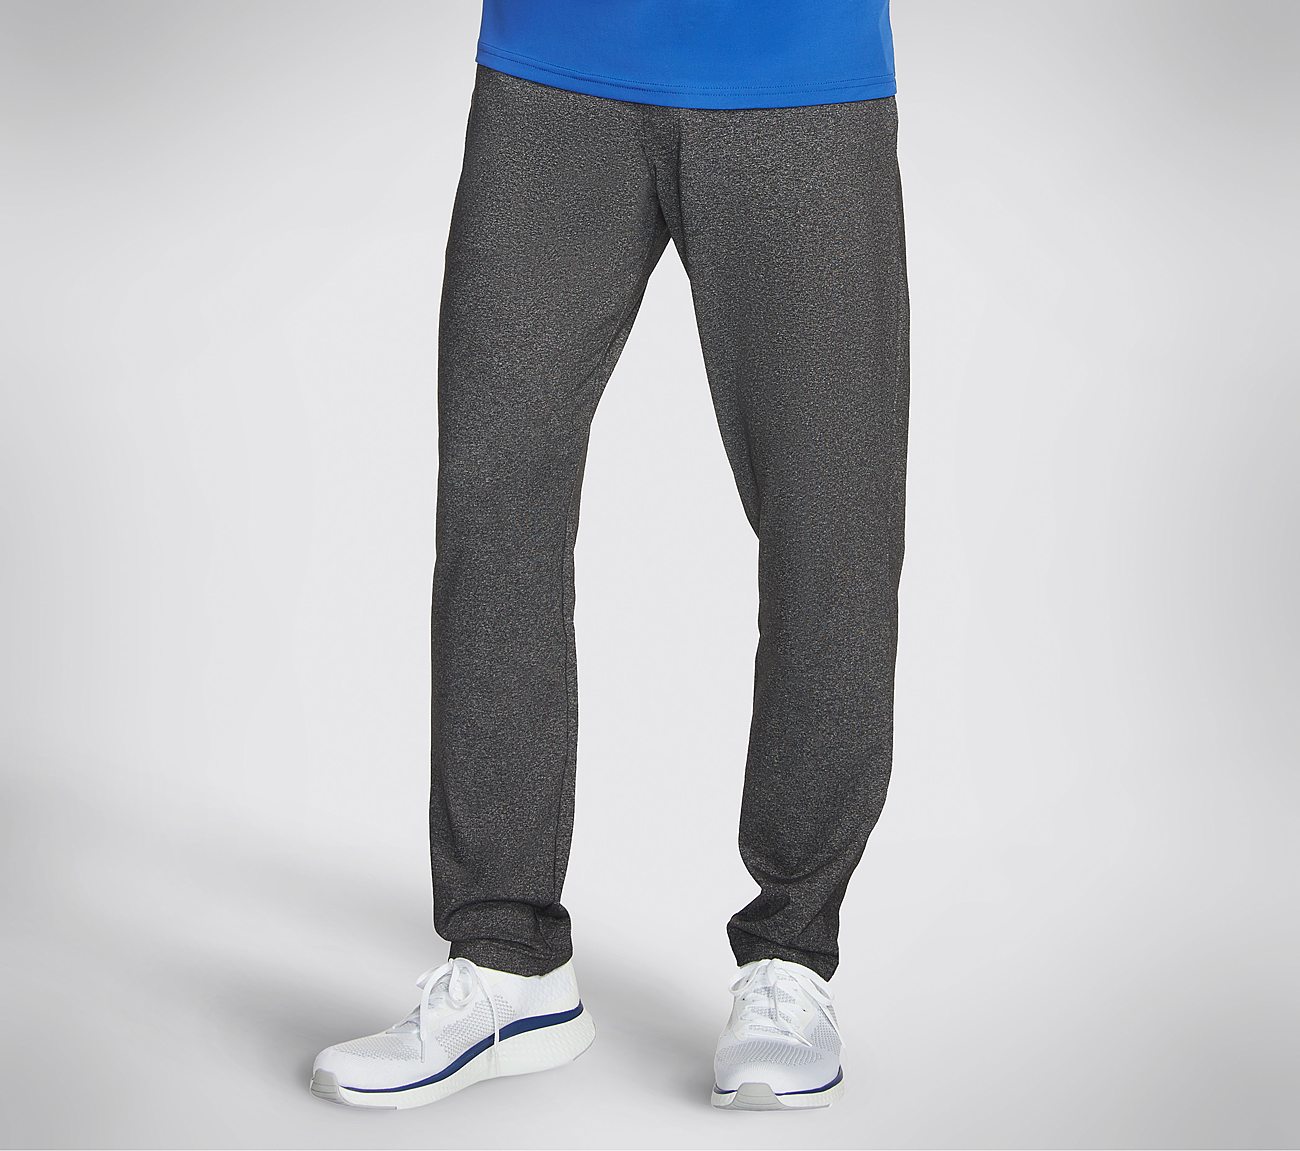 15 Minute Skechers Workout Pants for Gym